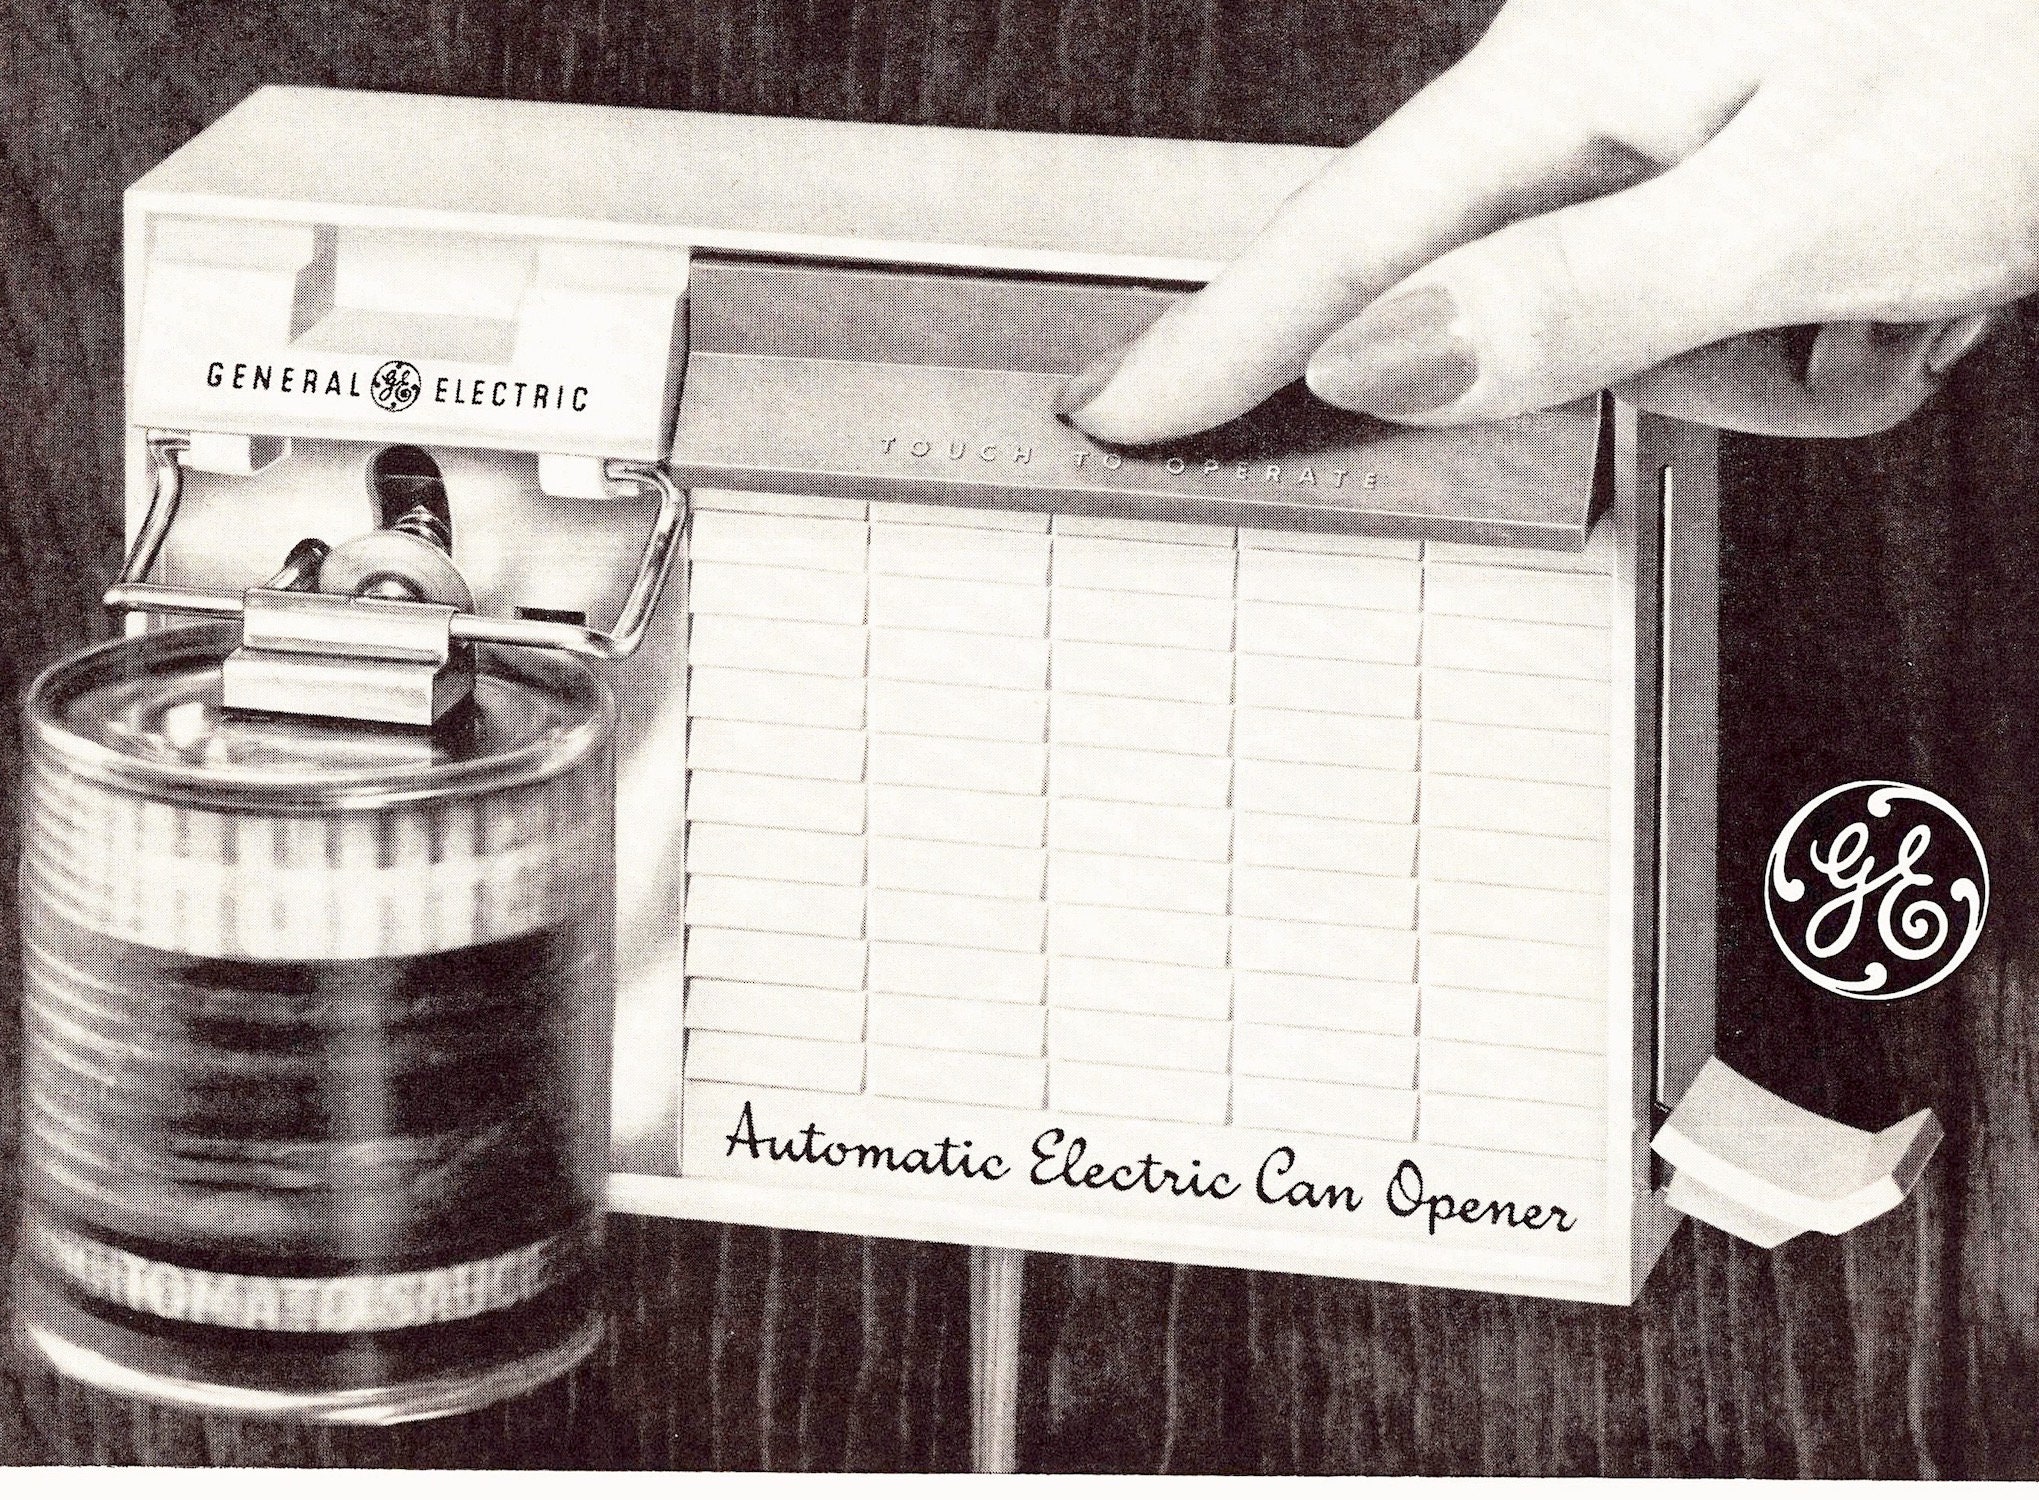 GE Automatic Electric Can Opener - Gil & Roy Props